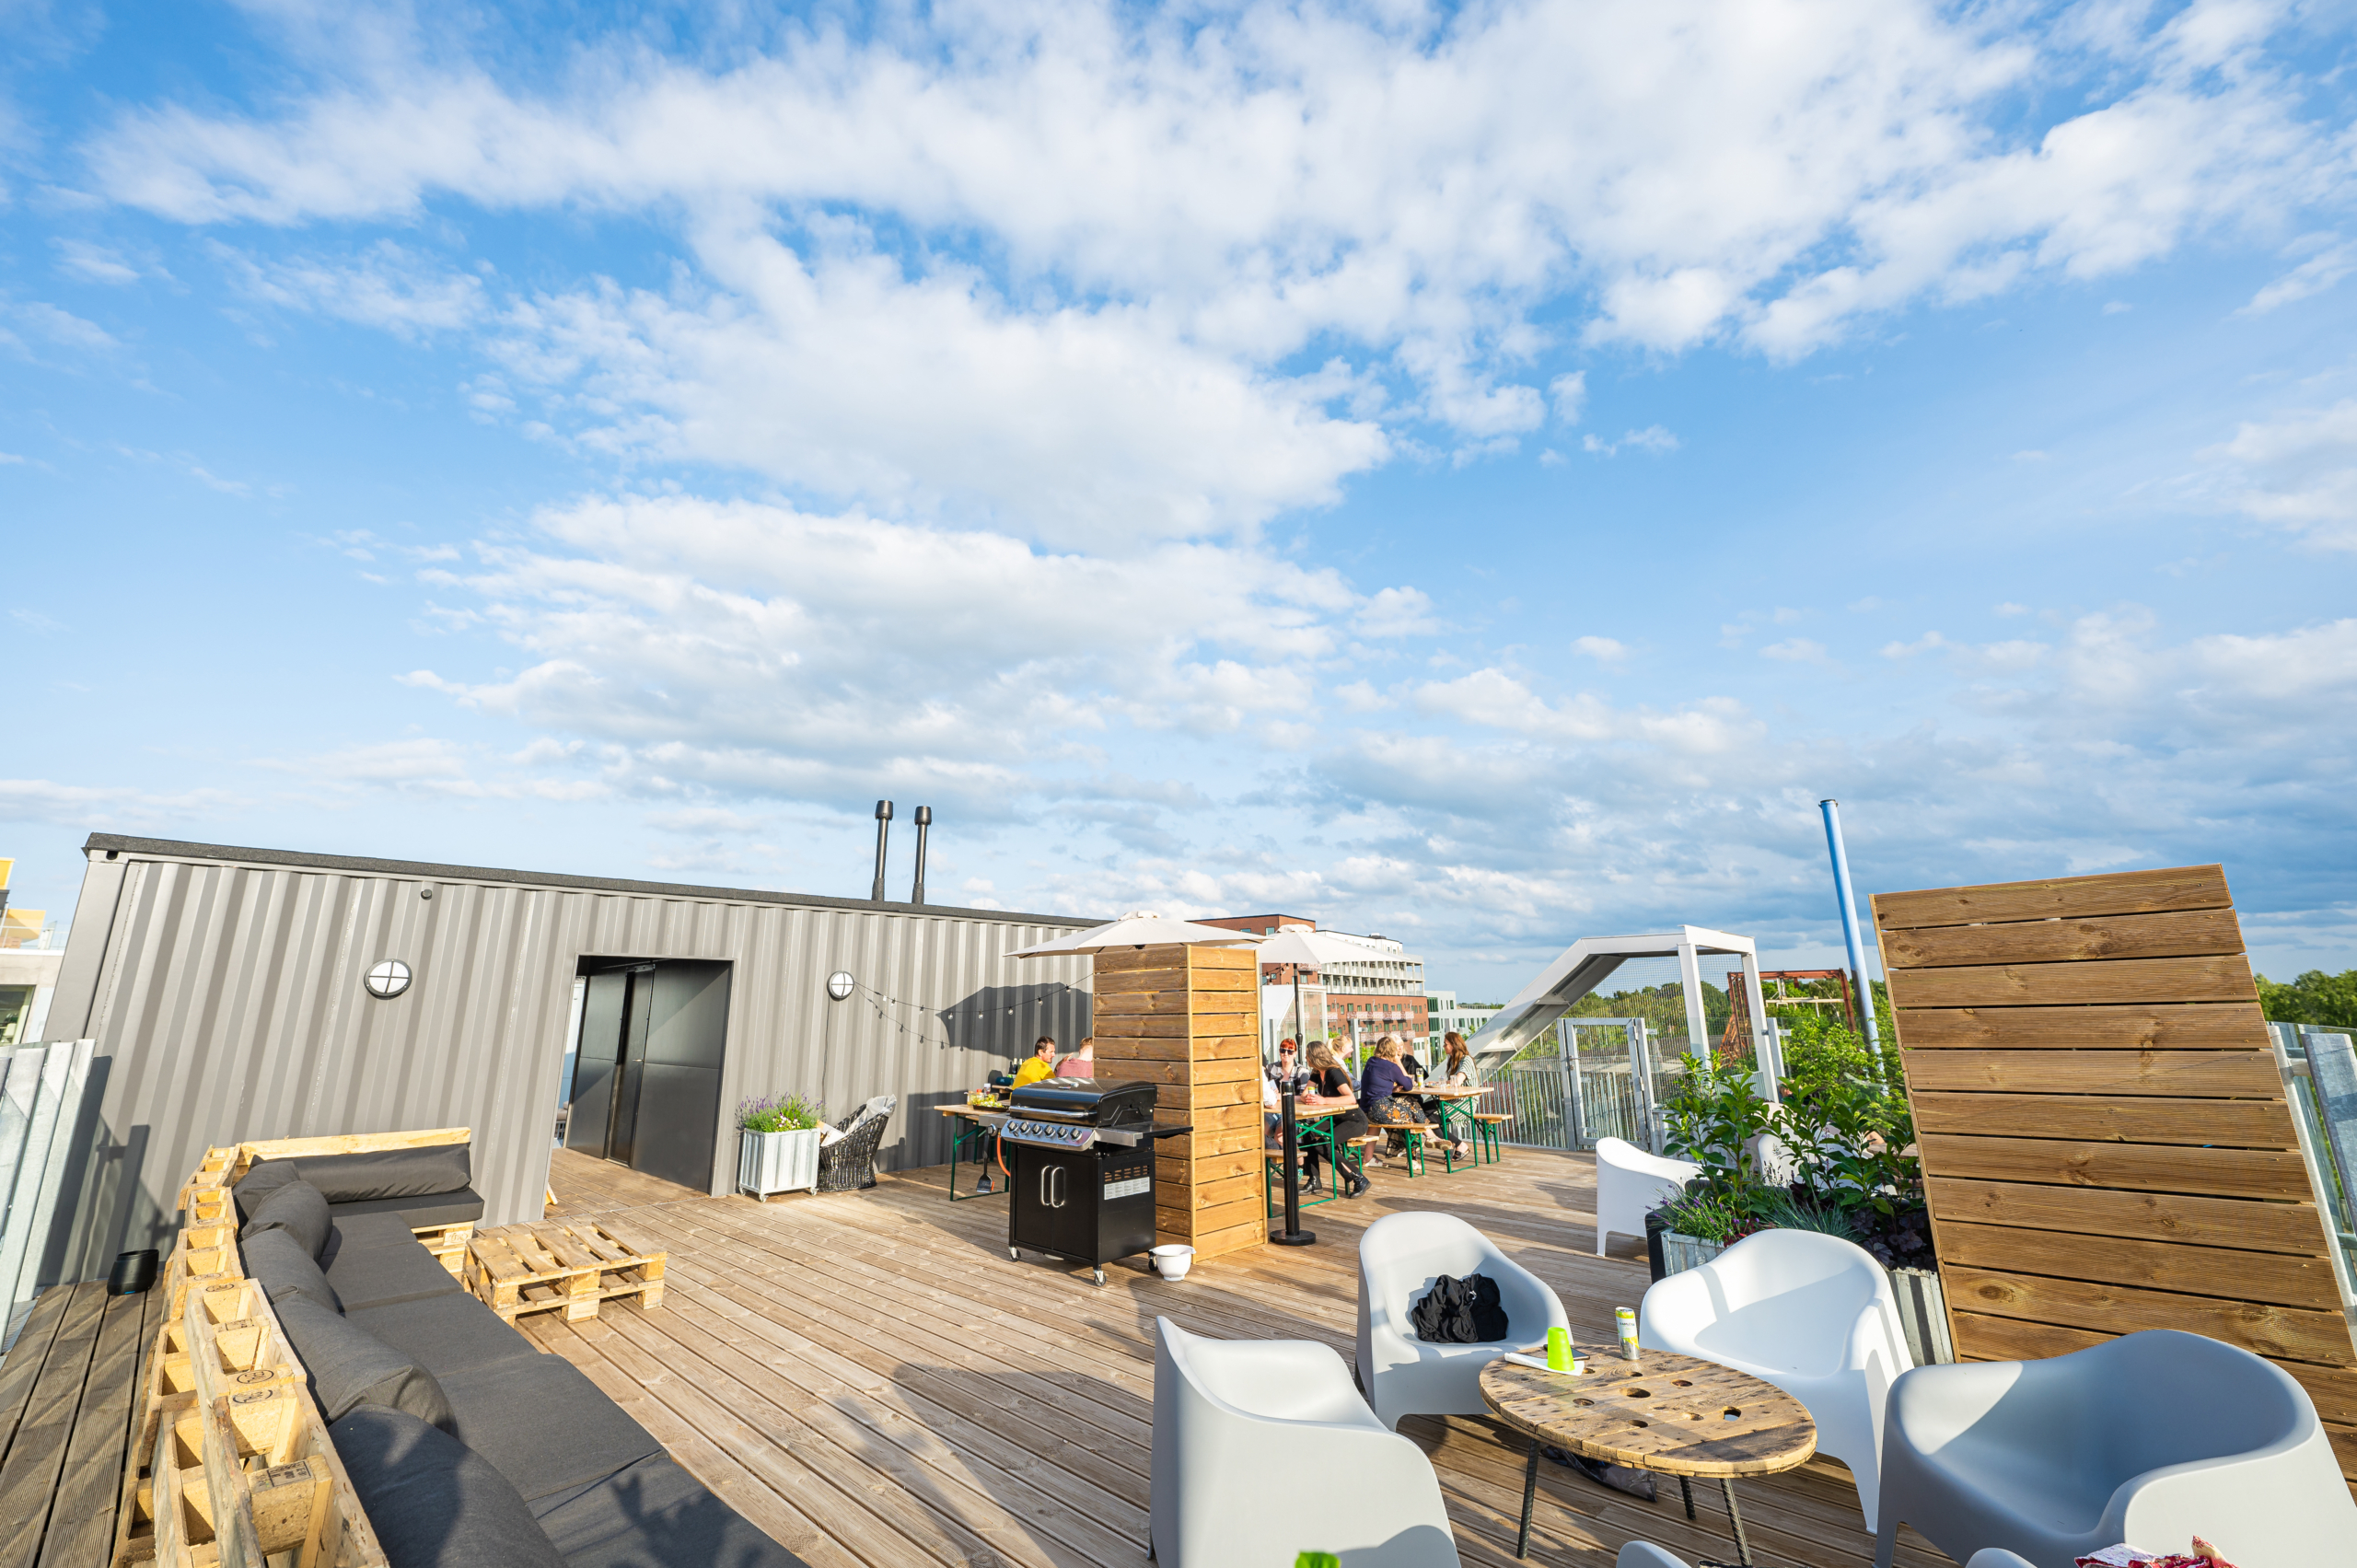 Tagterrasse | Container Living Musicon